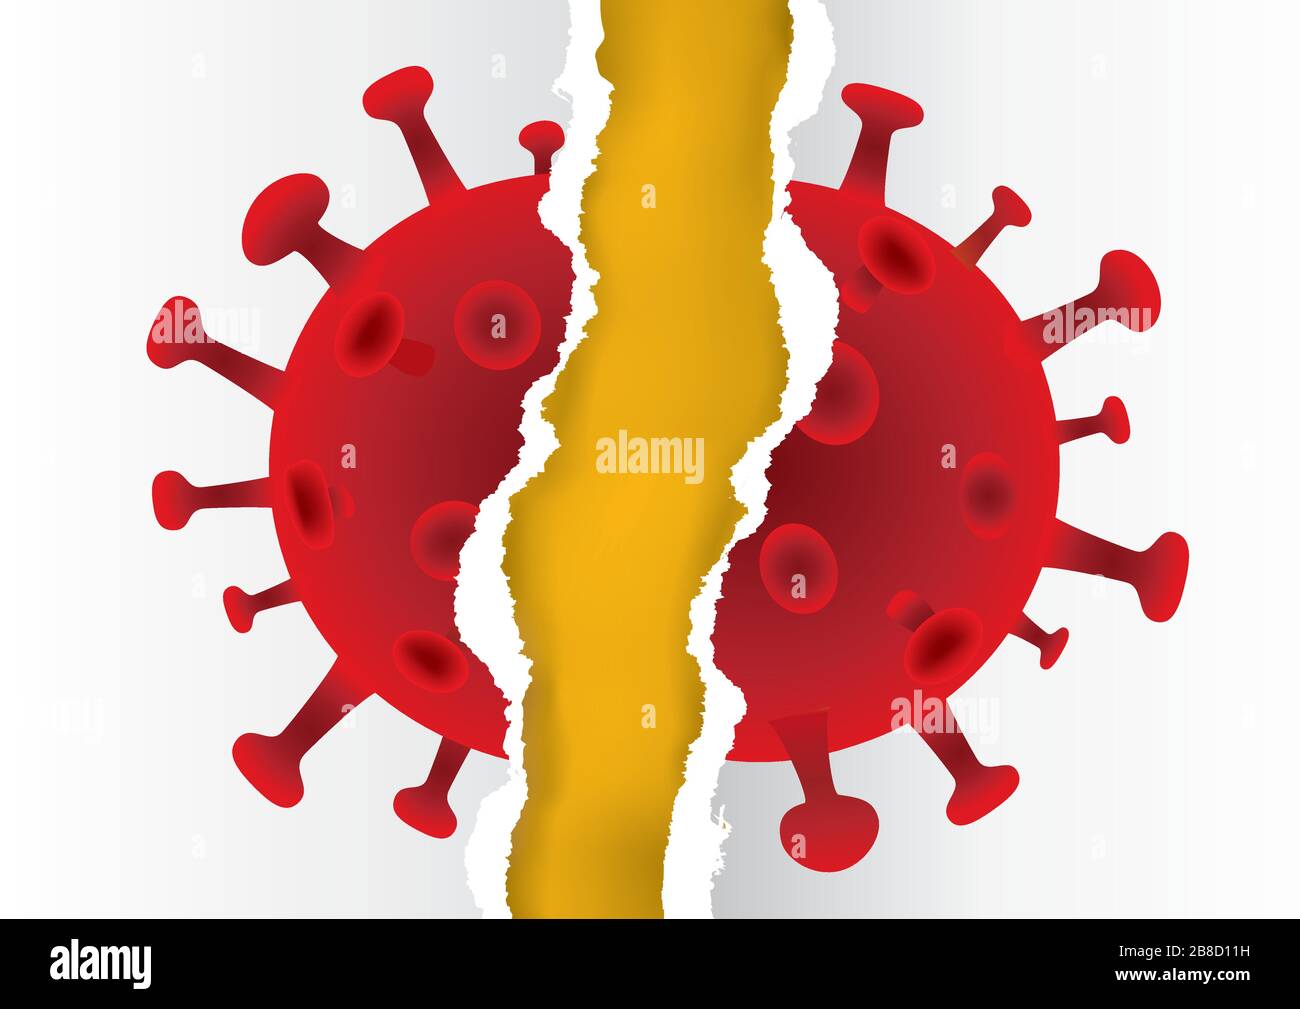 Ripped paper with Coronavirus image.  Expressive illustration symbolizing the destruction of coronavirus. Place for your text. Vector available. Stock Vector